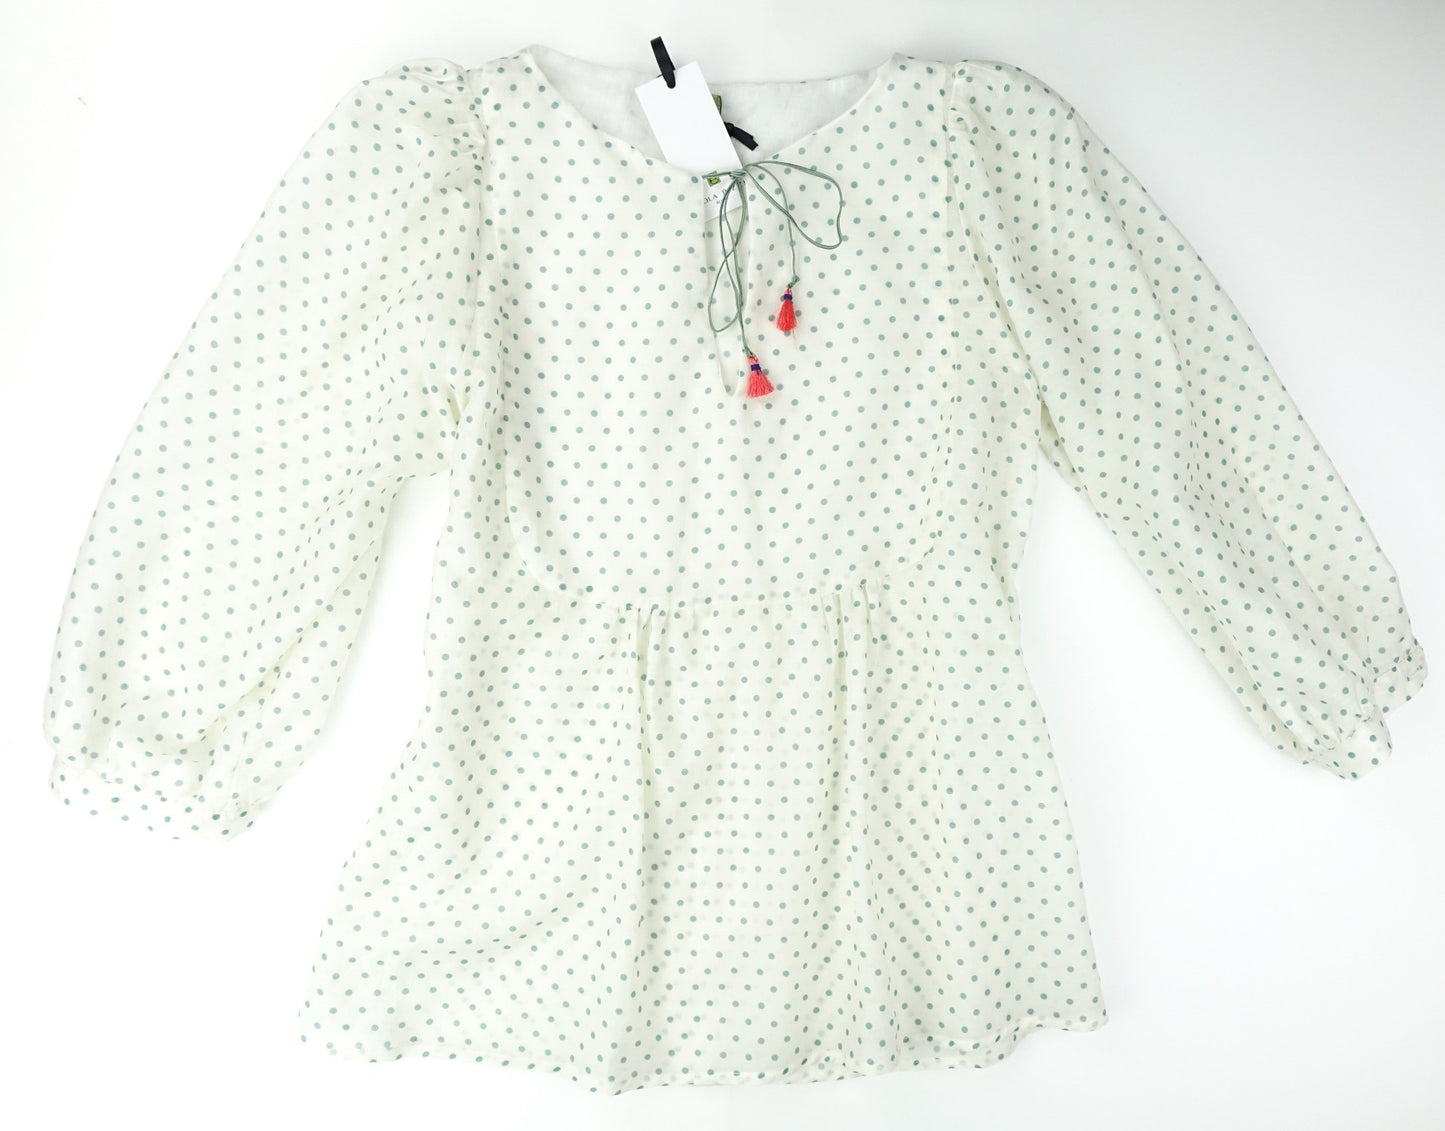 Cream shirt with light blue polka dots and tassels